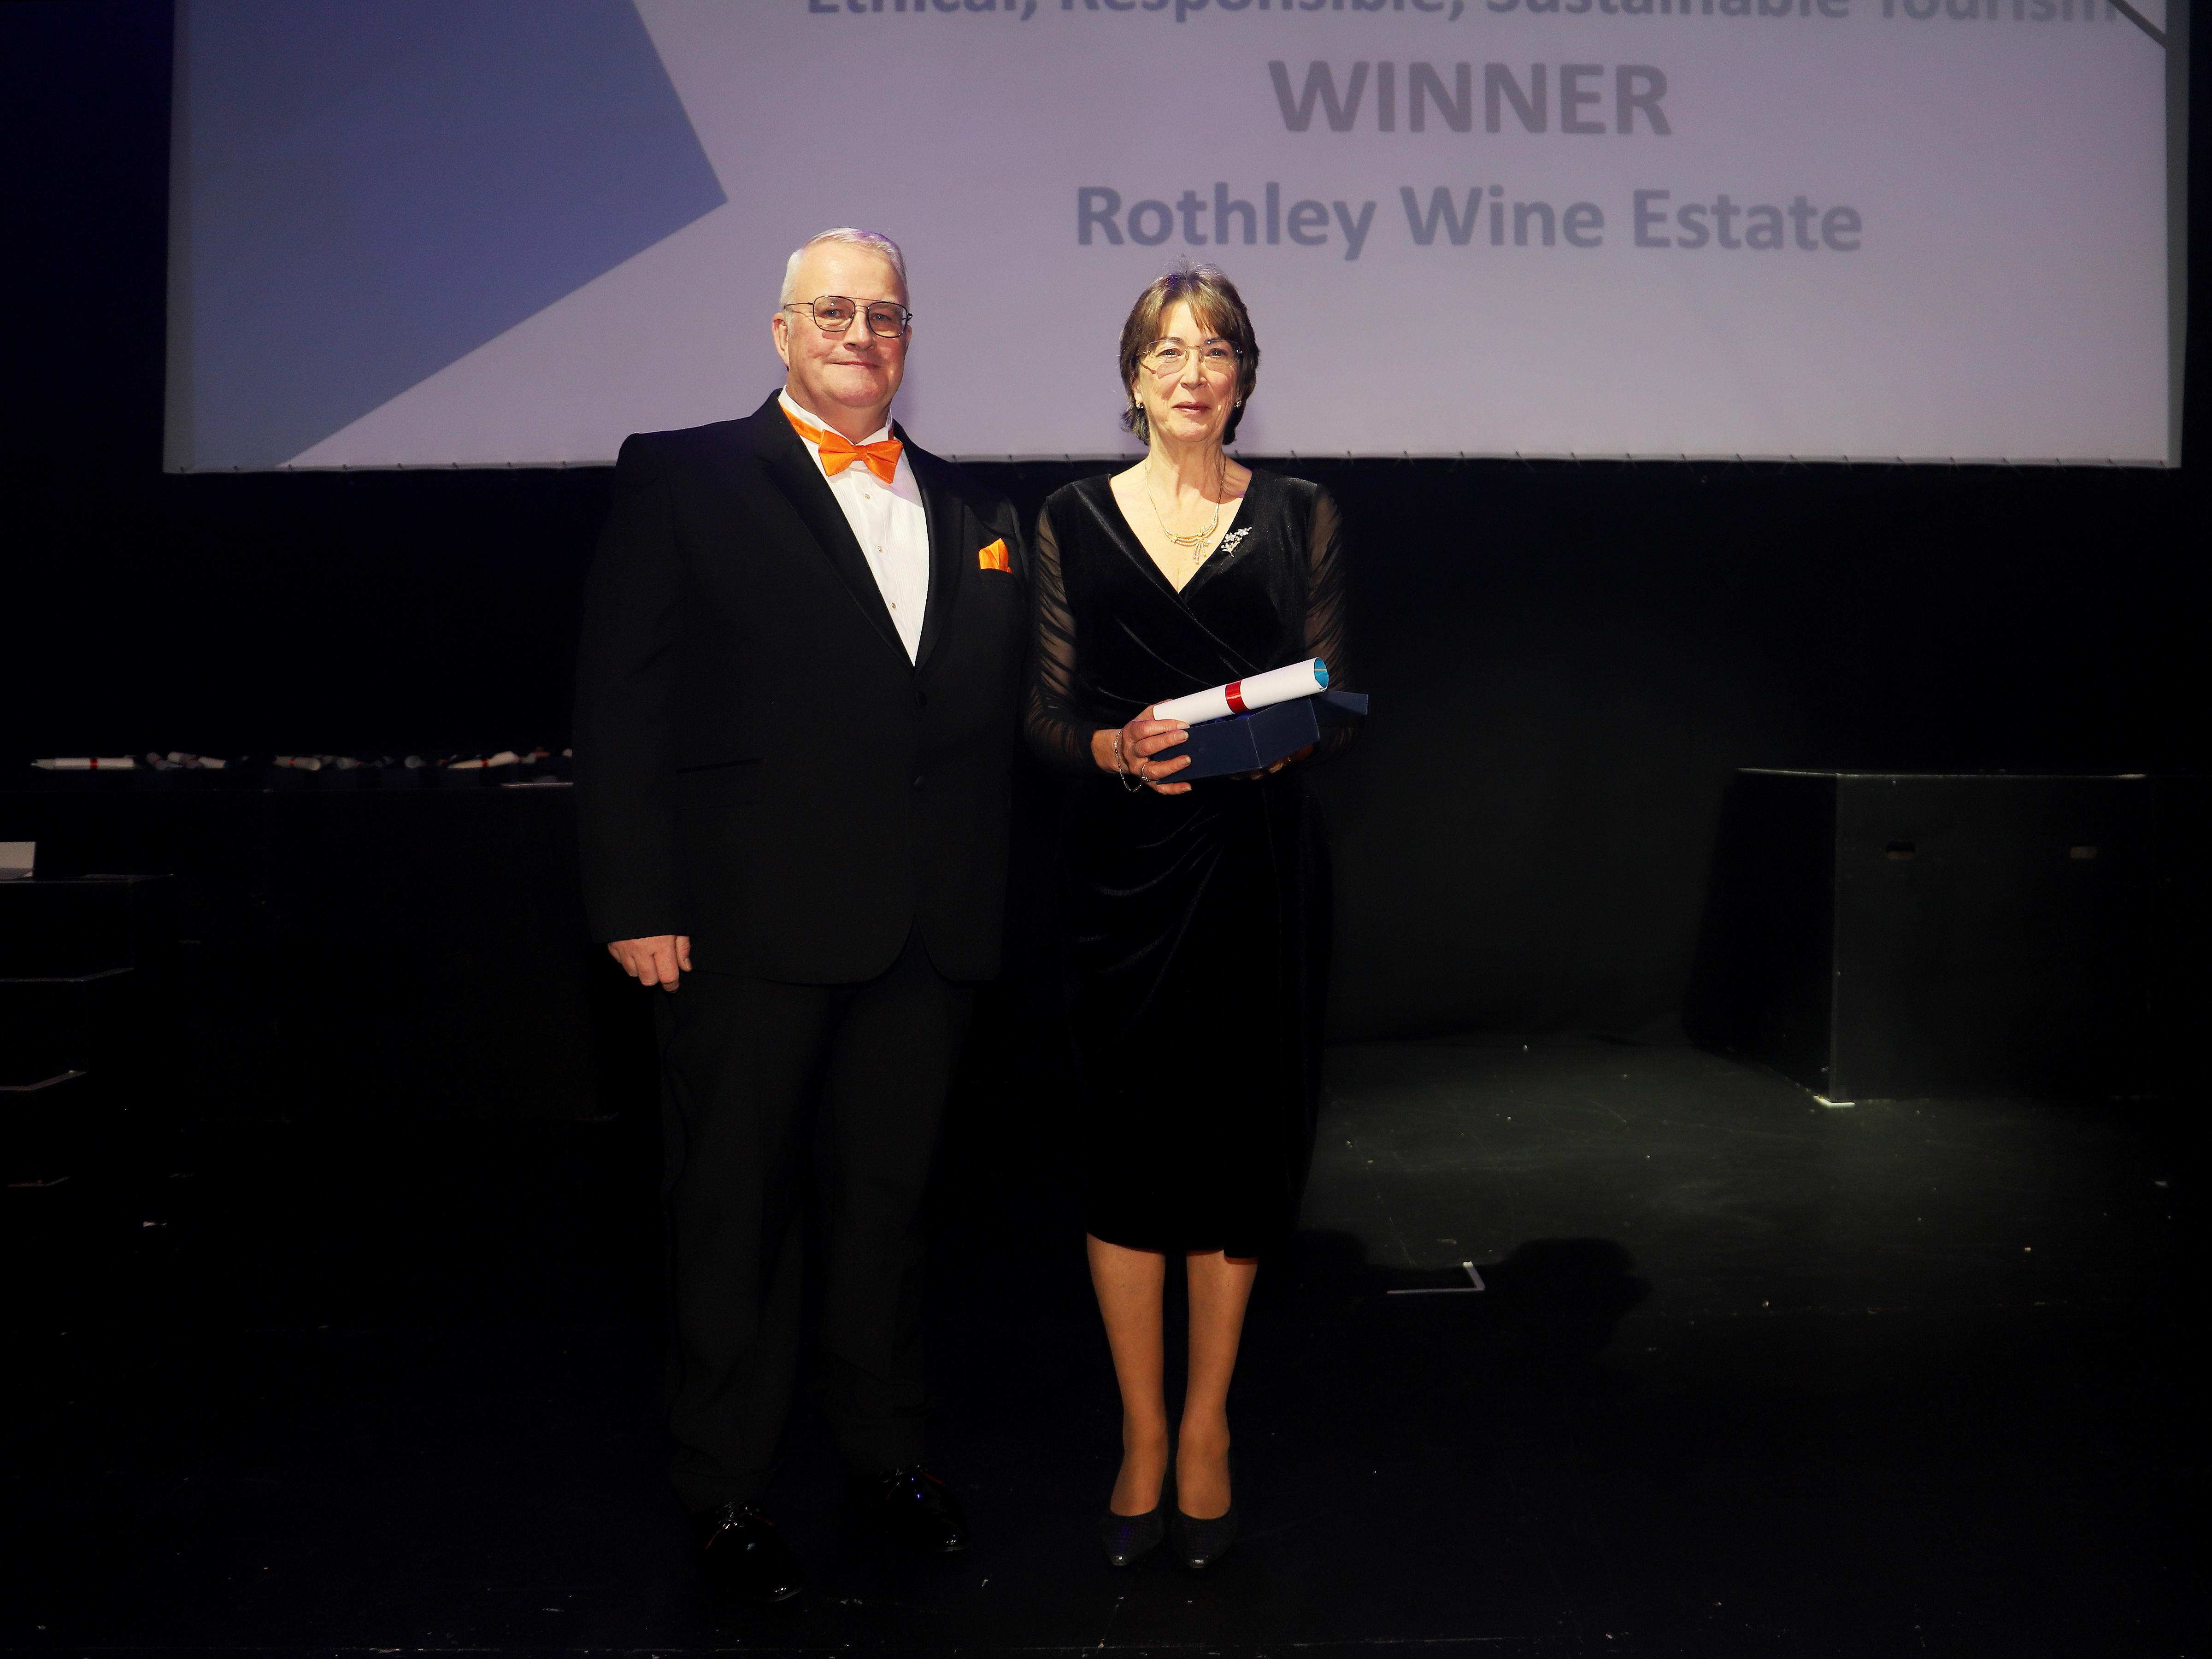 Rothely Wine Estate - WINNER - Ethical, Responsible, Sustainable Tourism